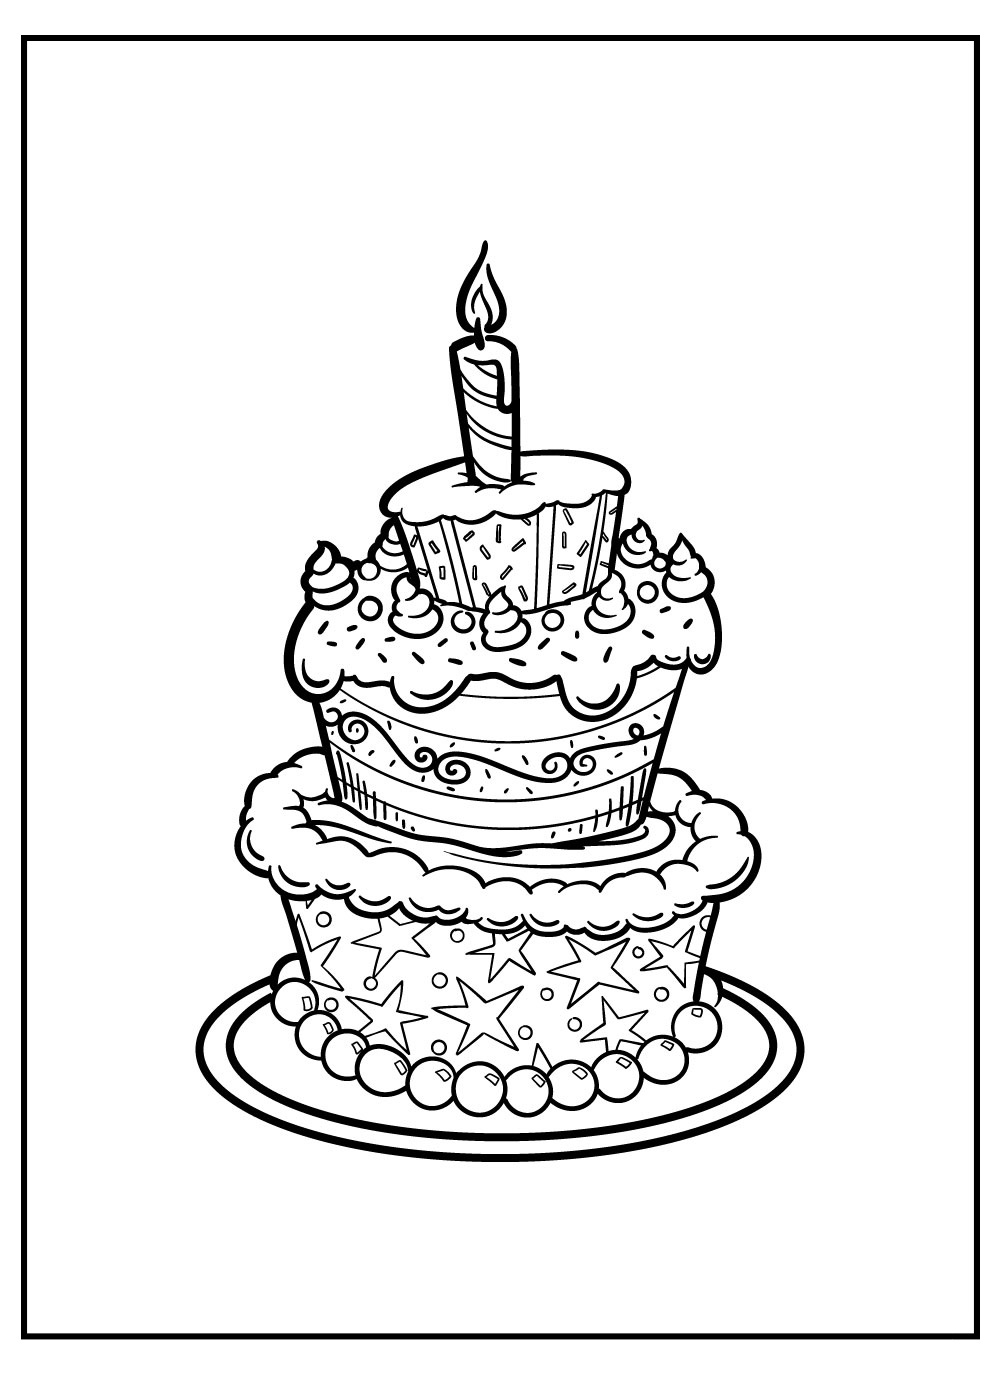 Free Birthday Cake For Party Coloring Page